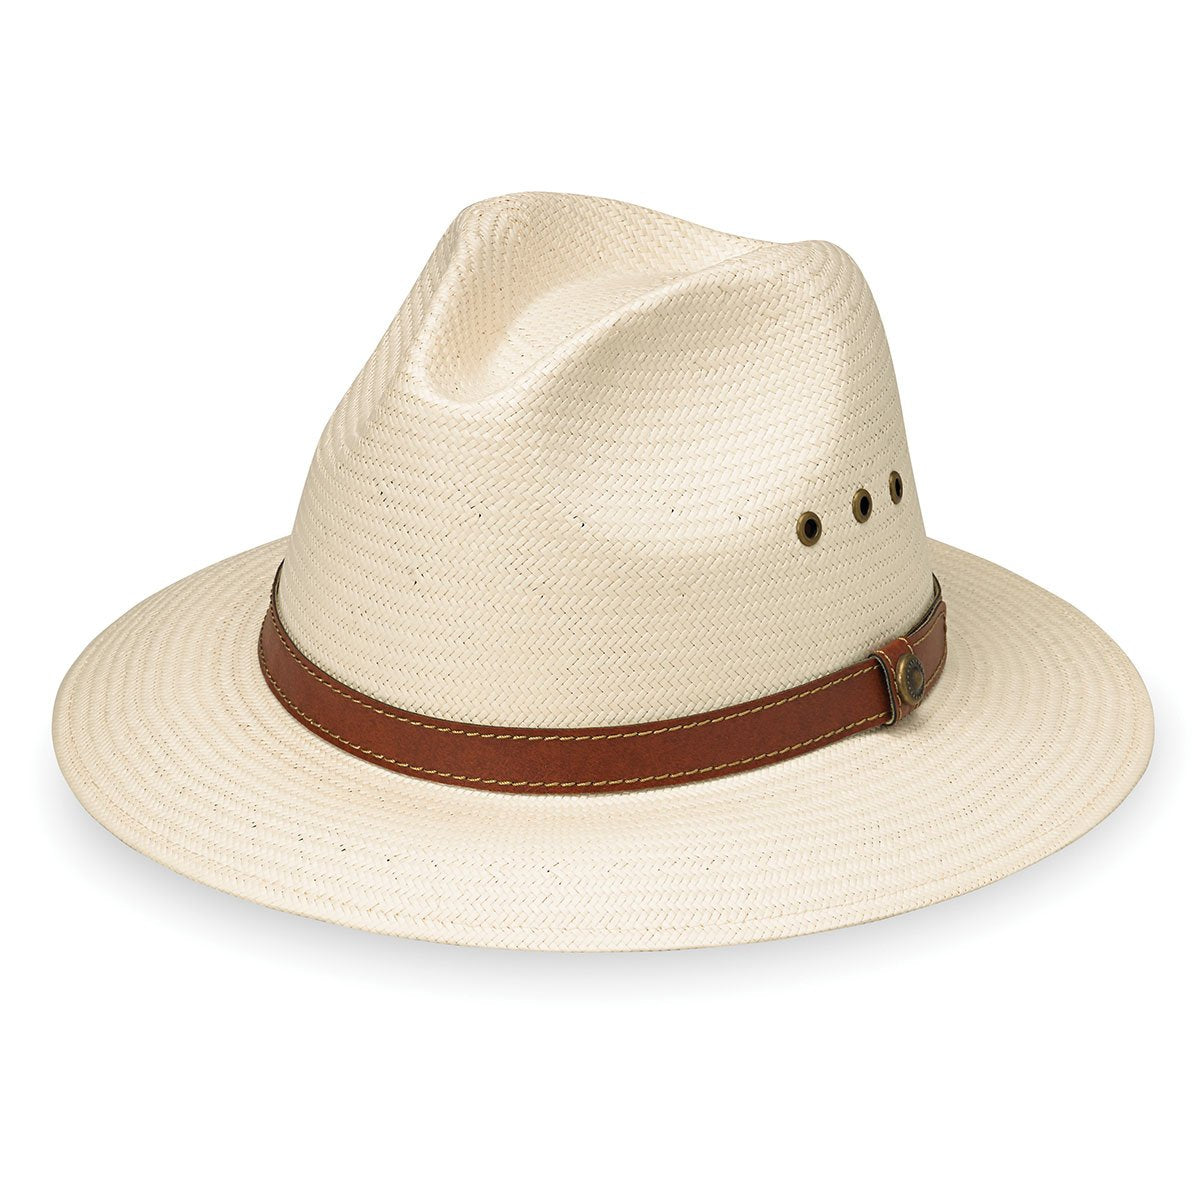 Featuring Avery Unisex Fedora Style UPF Sun Hat in Natural from Wallaroo